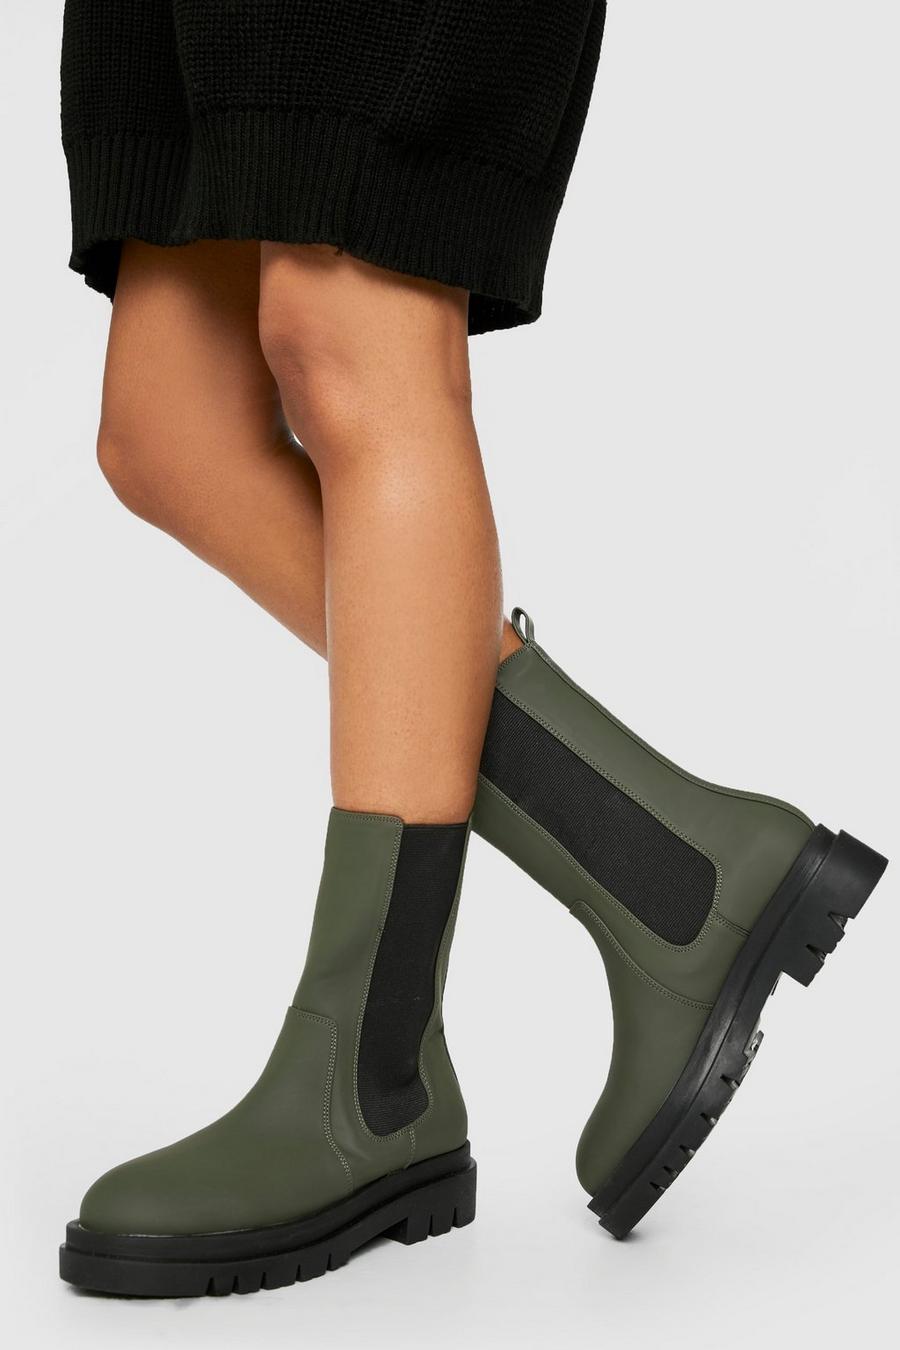 Khaki Rubber Calf High Chunky Sole Chelsea Boots image number 1